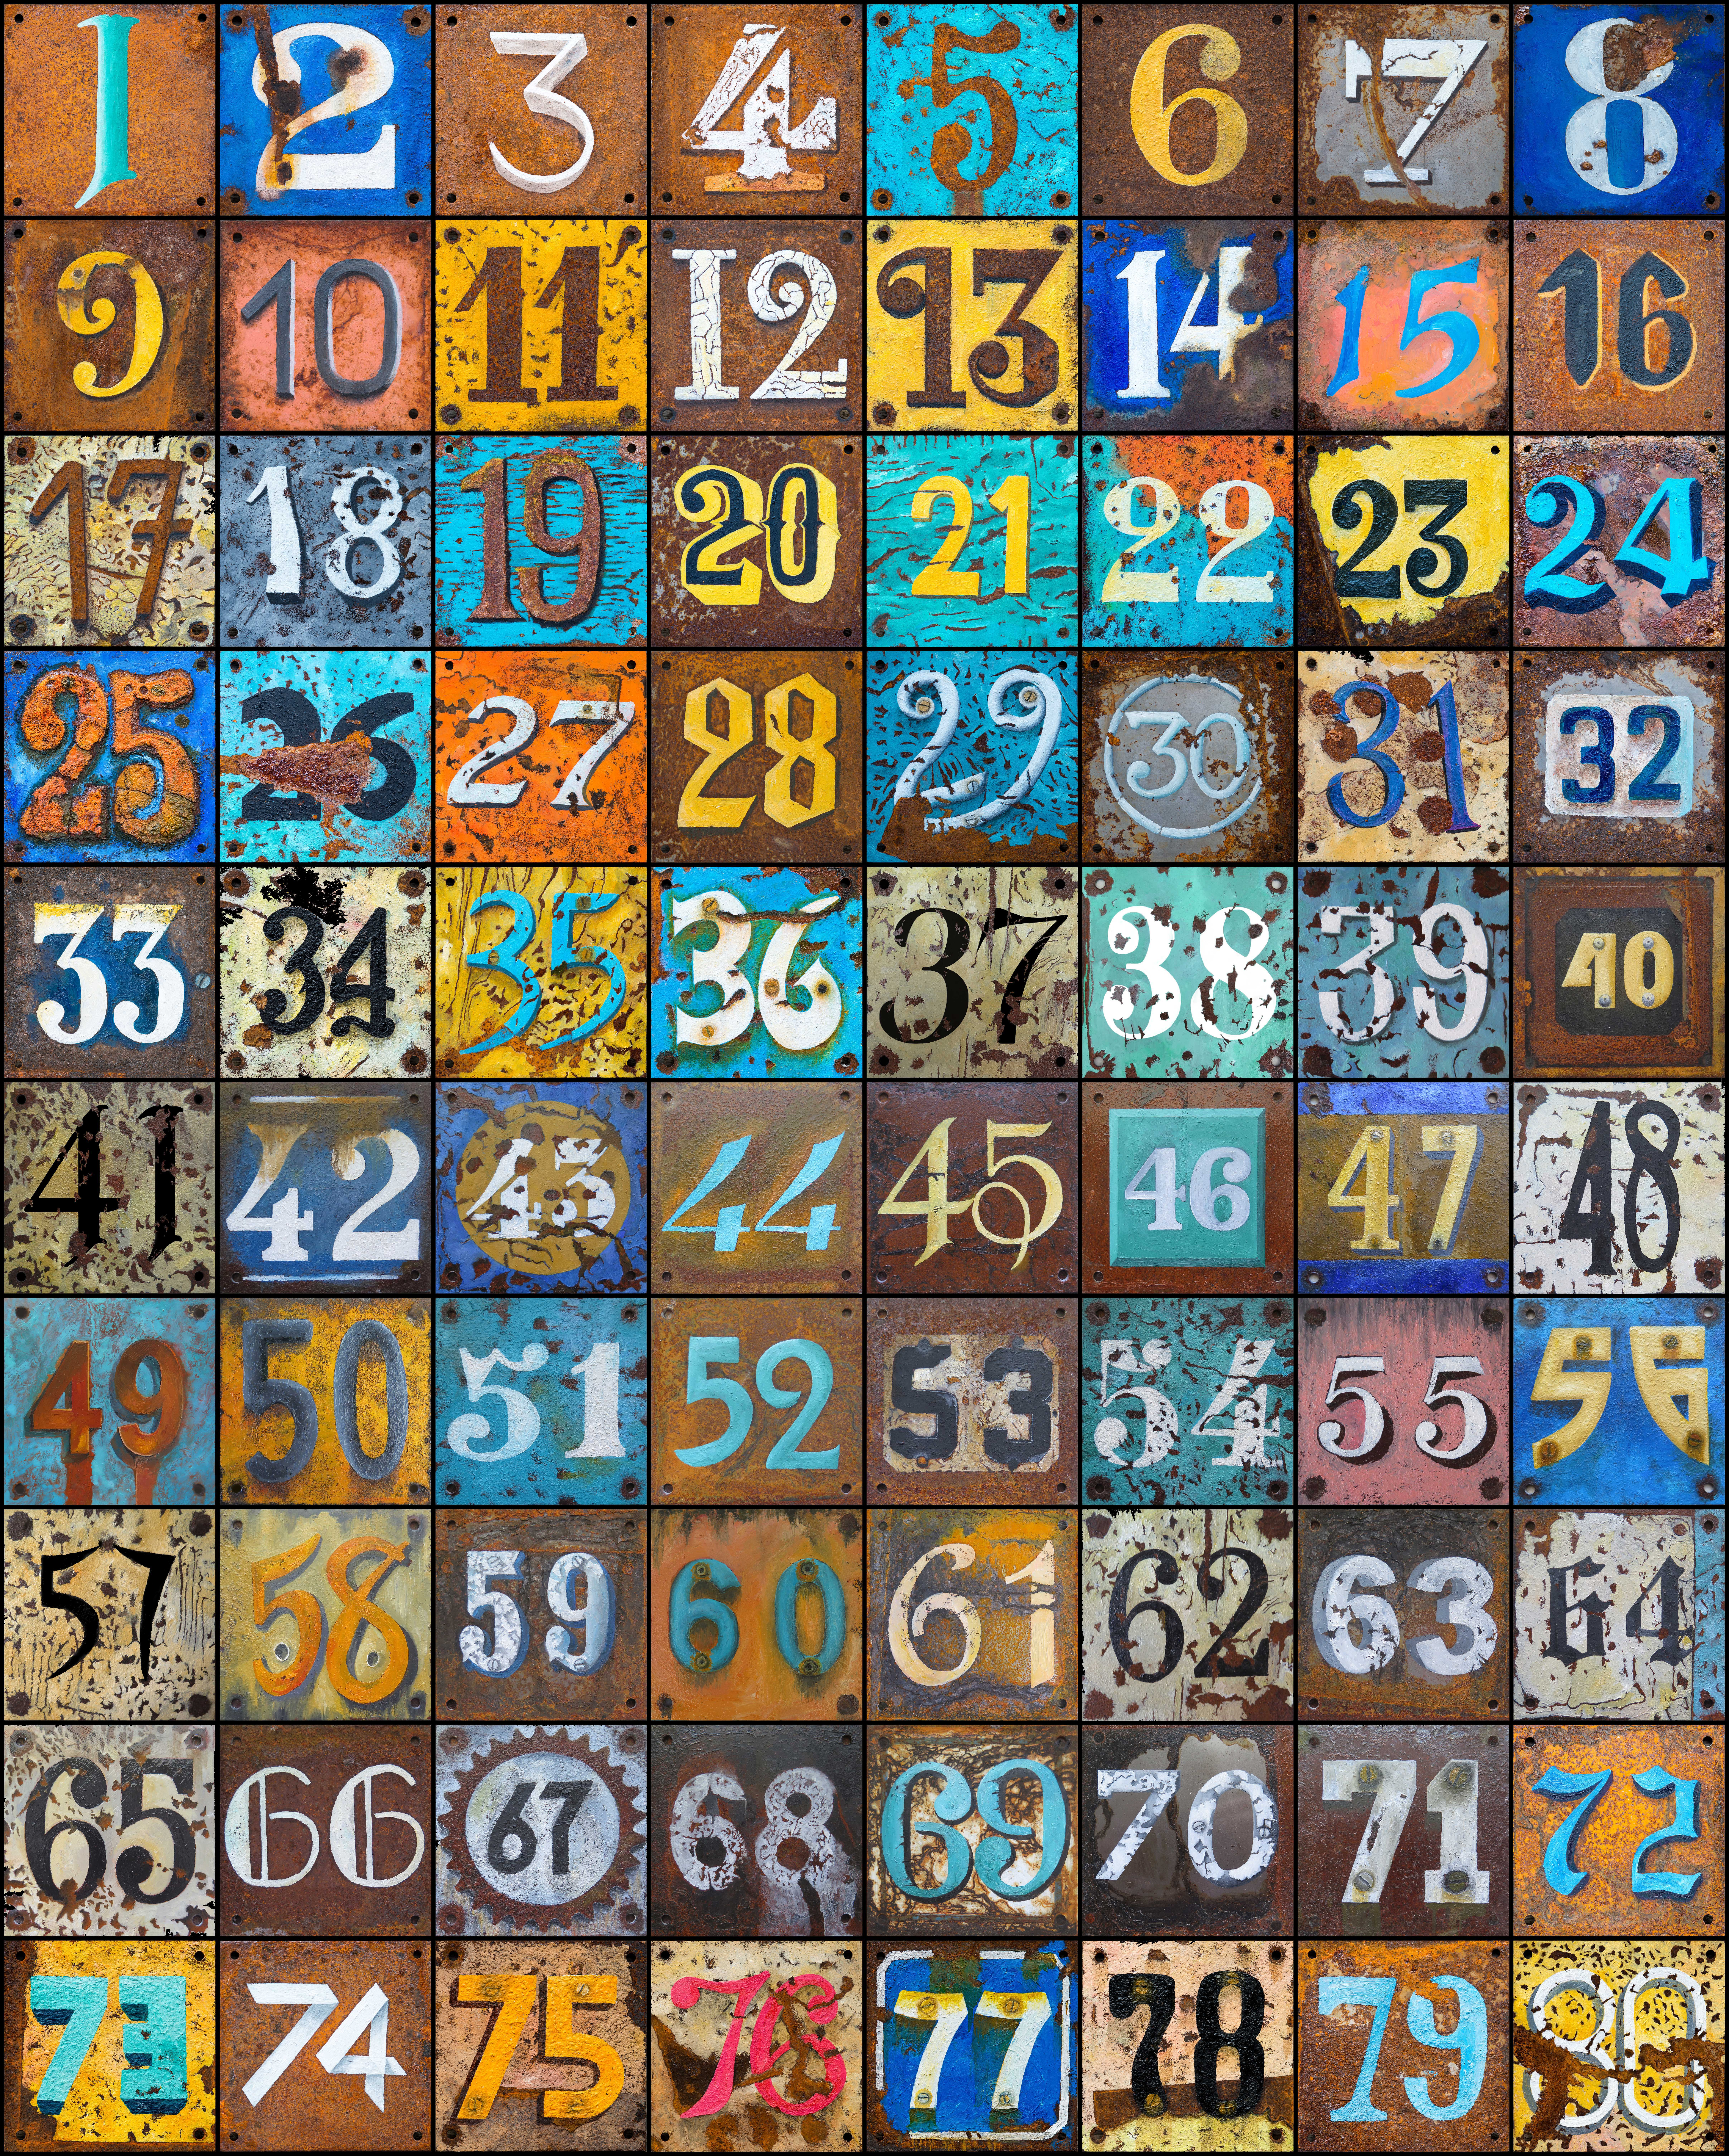 multicolored, texture, motley, numbers, rust, textures iphone wallpaper